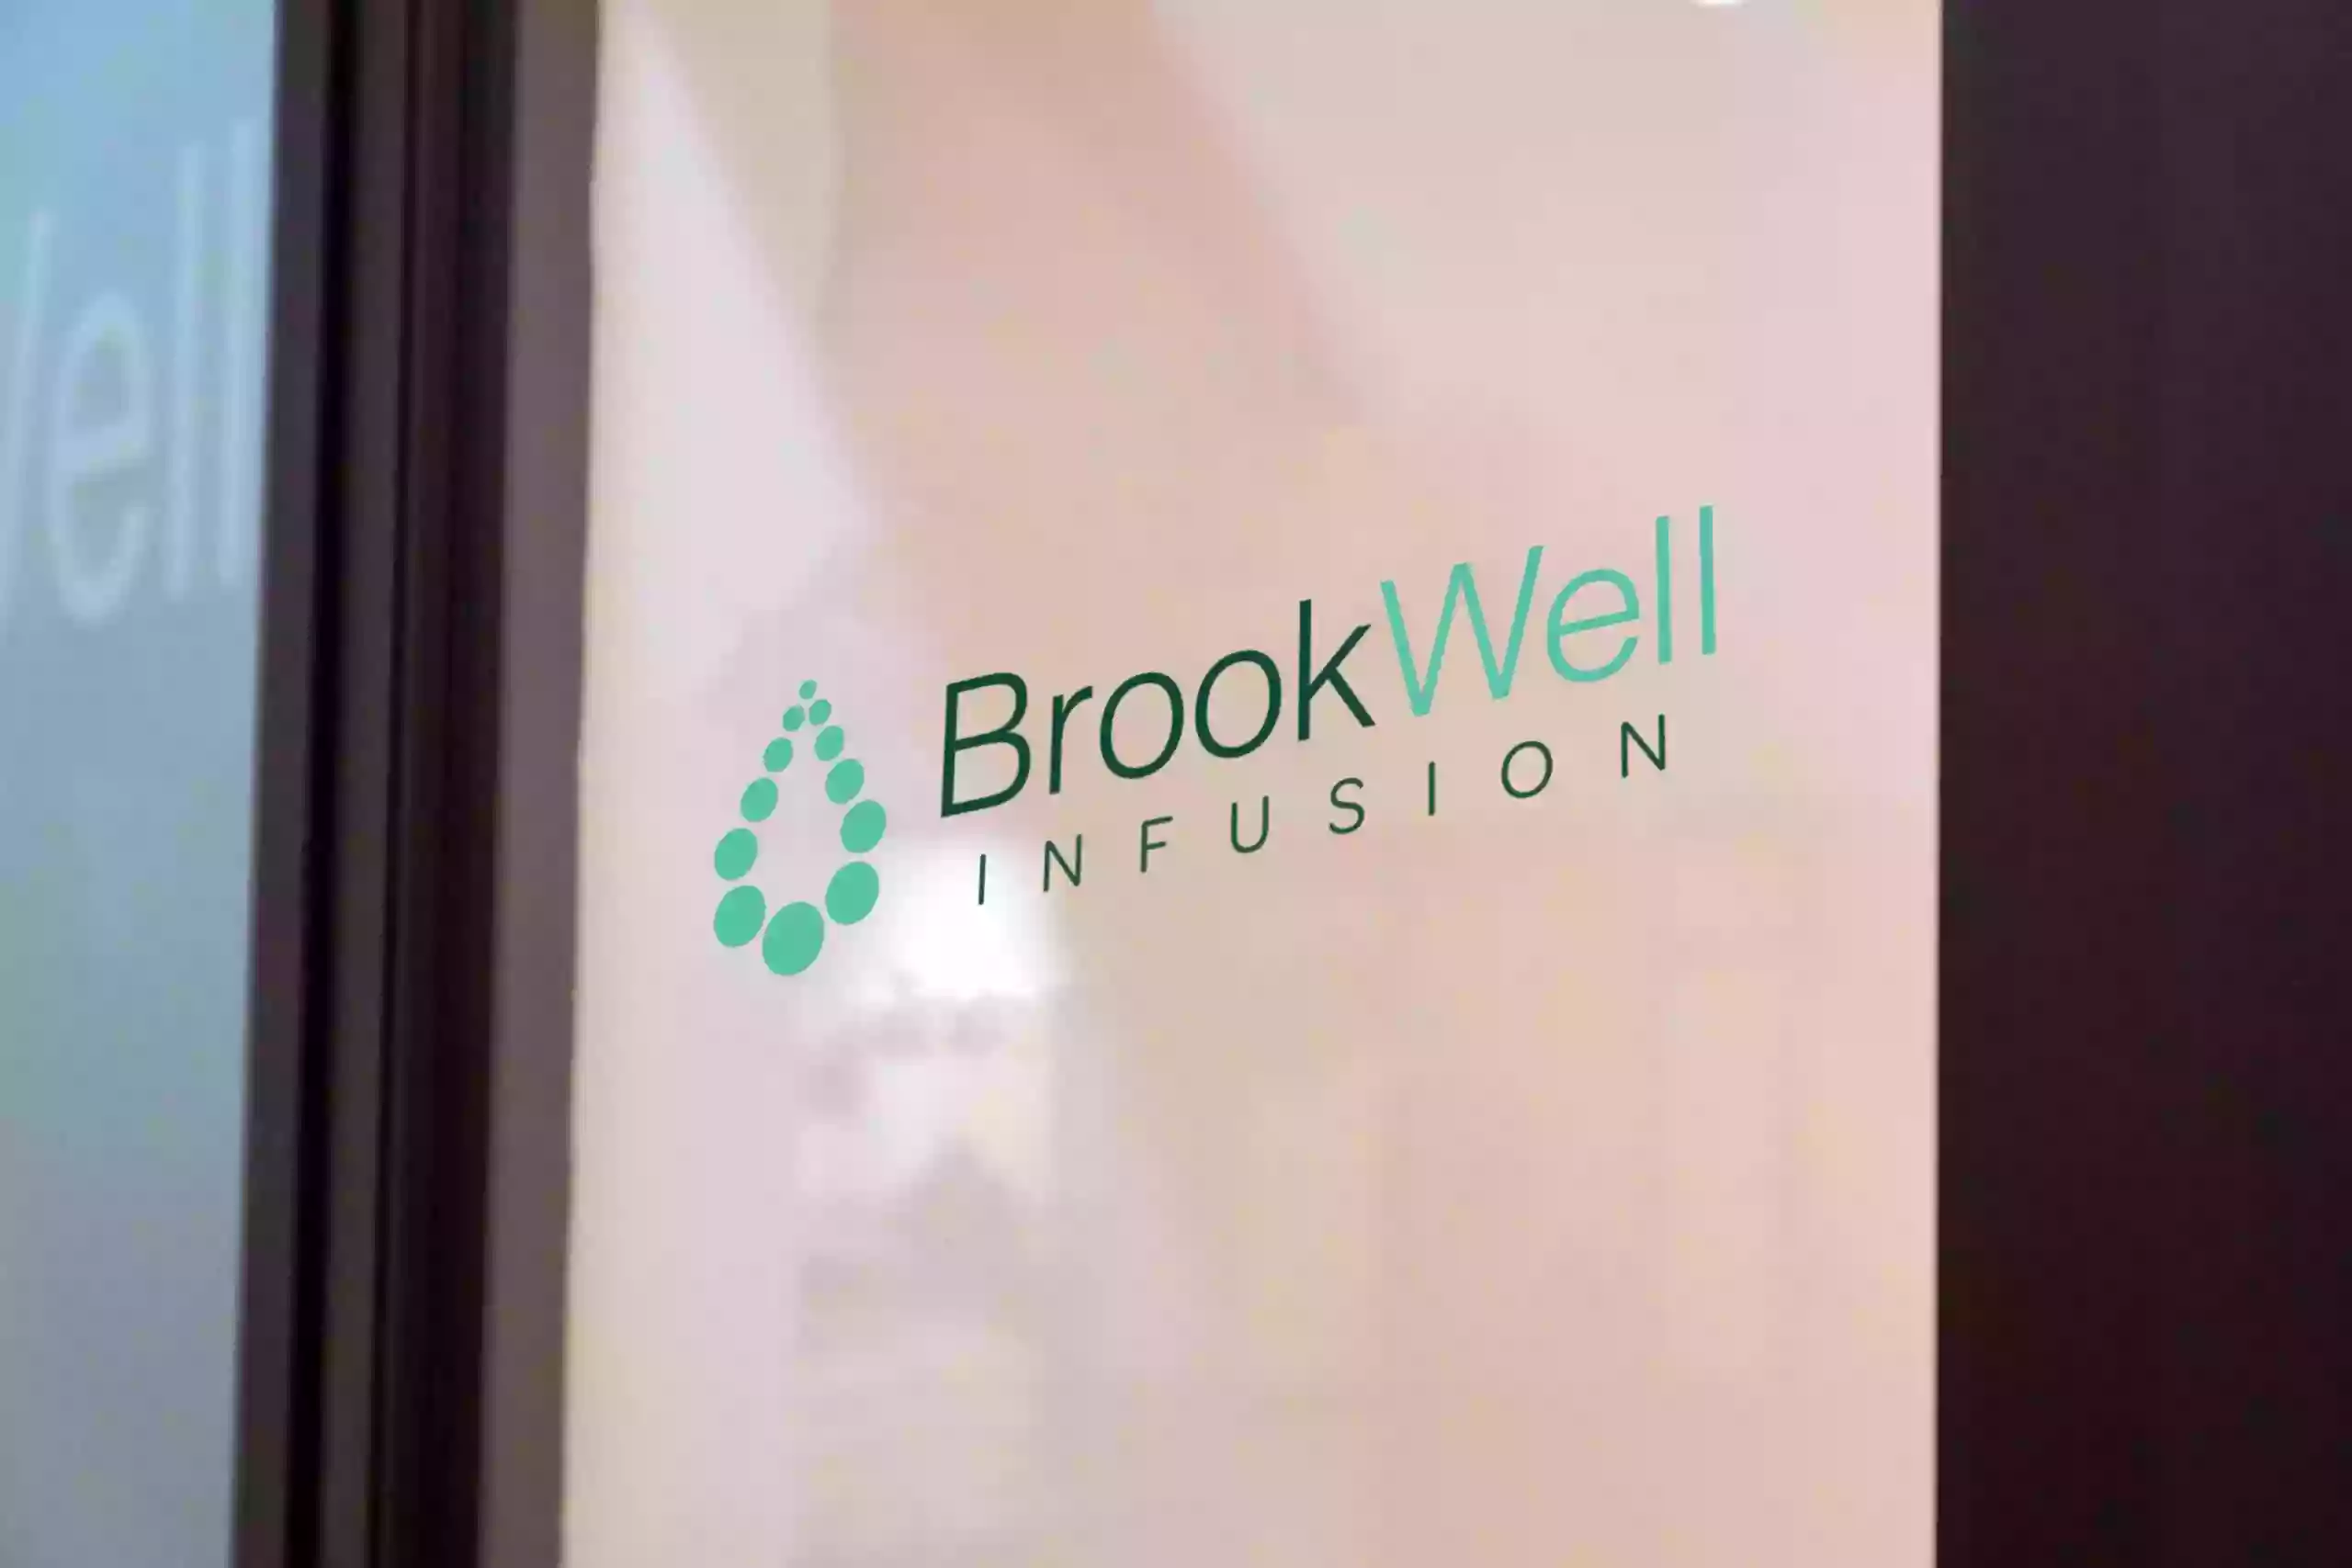 BrookWell Infusion - Outpatient Infusion Therapy Treatment Center